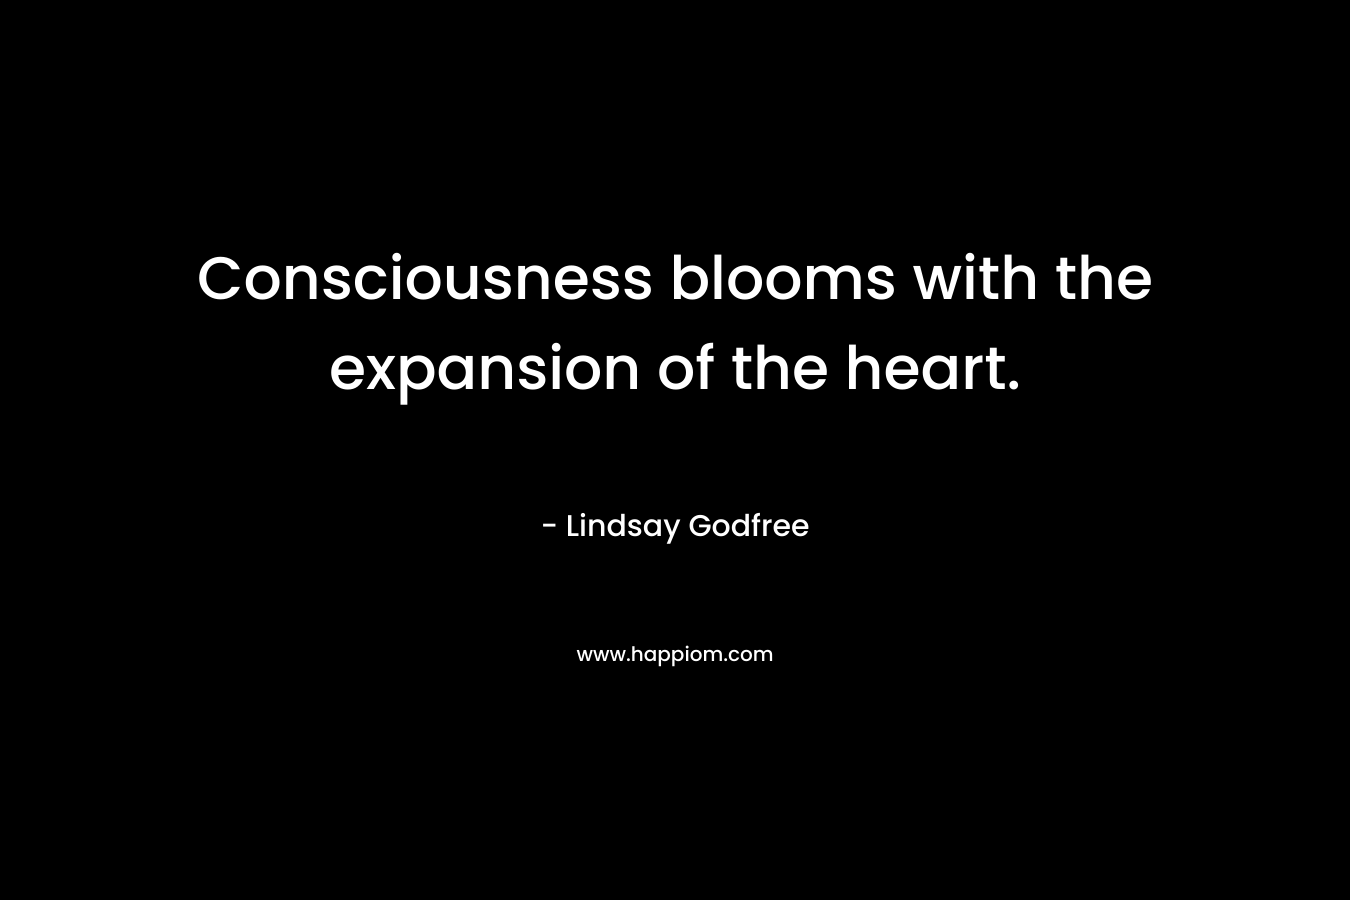 Consciousness blooms with the expansion of the heart. – Lindsay Godfree